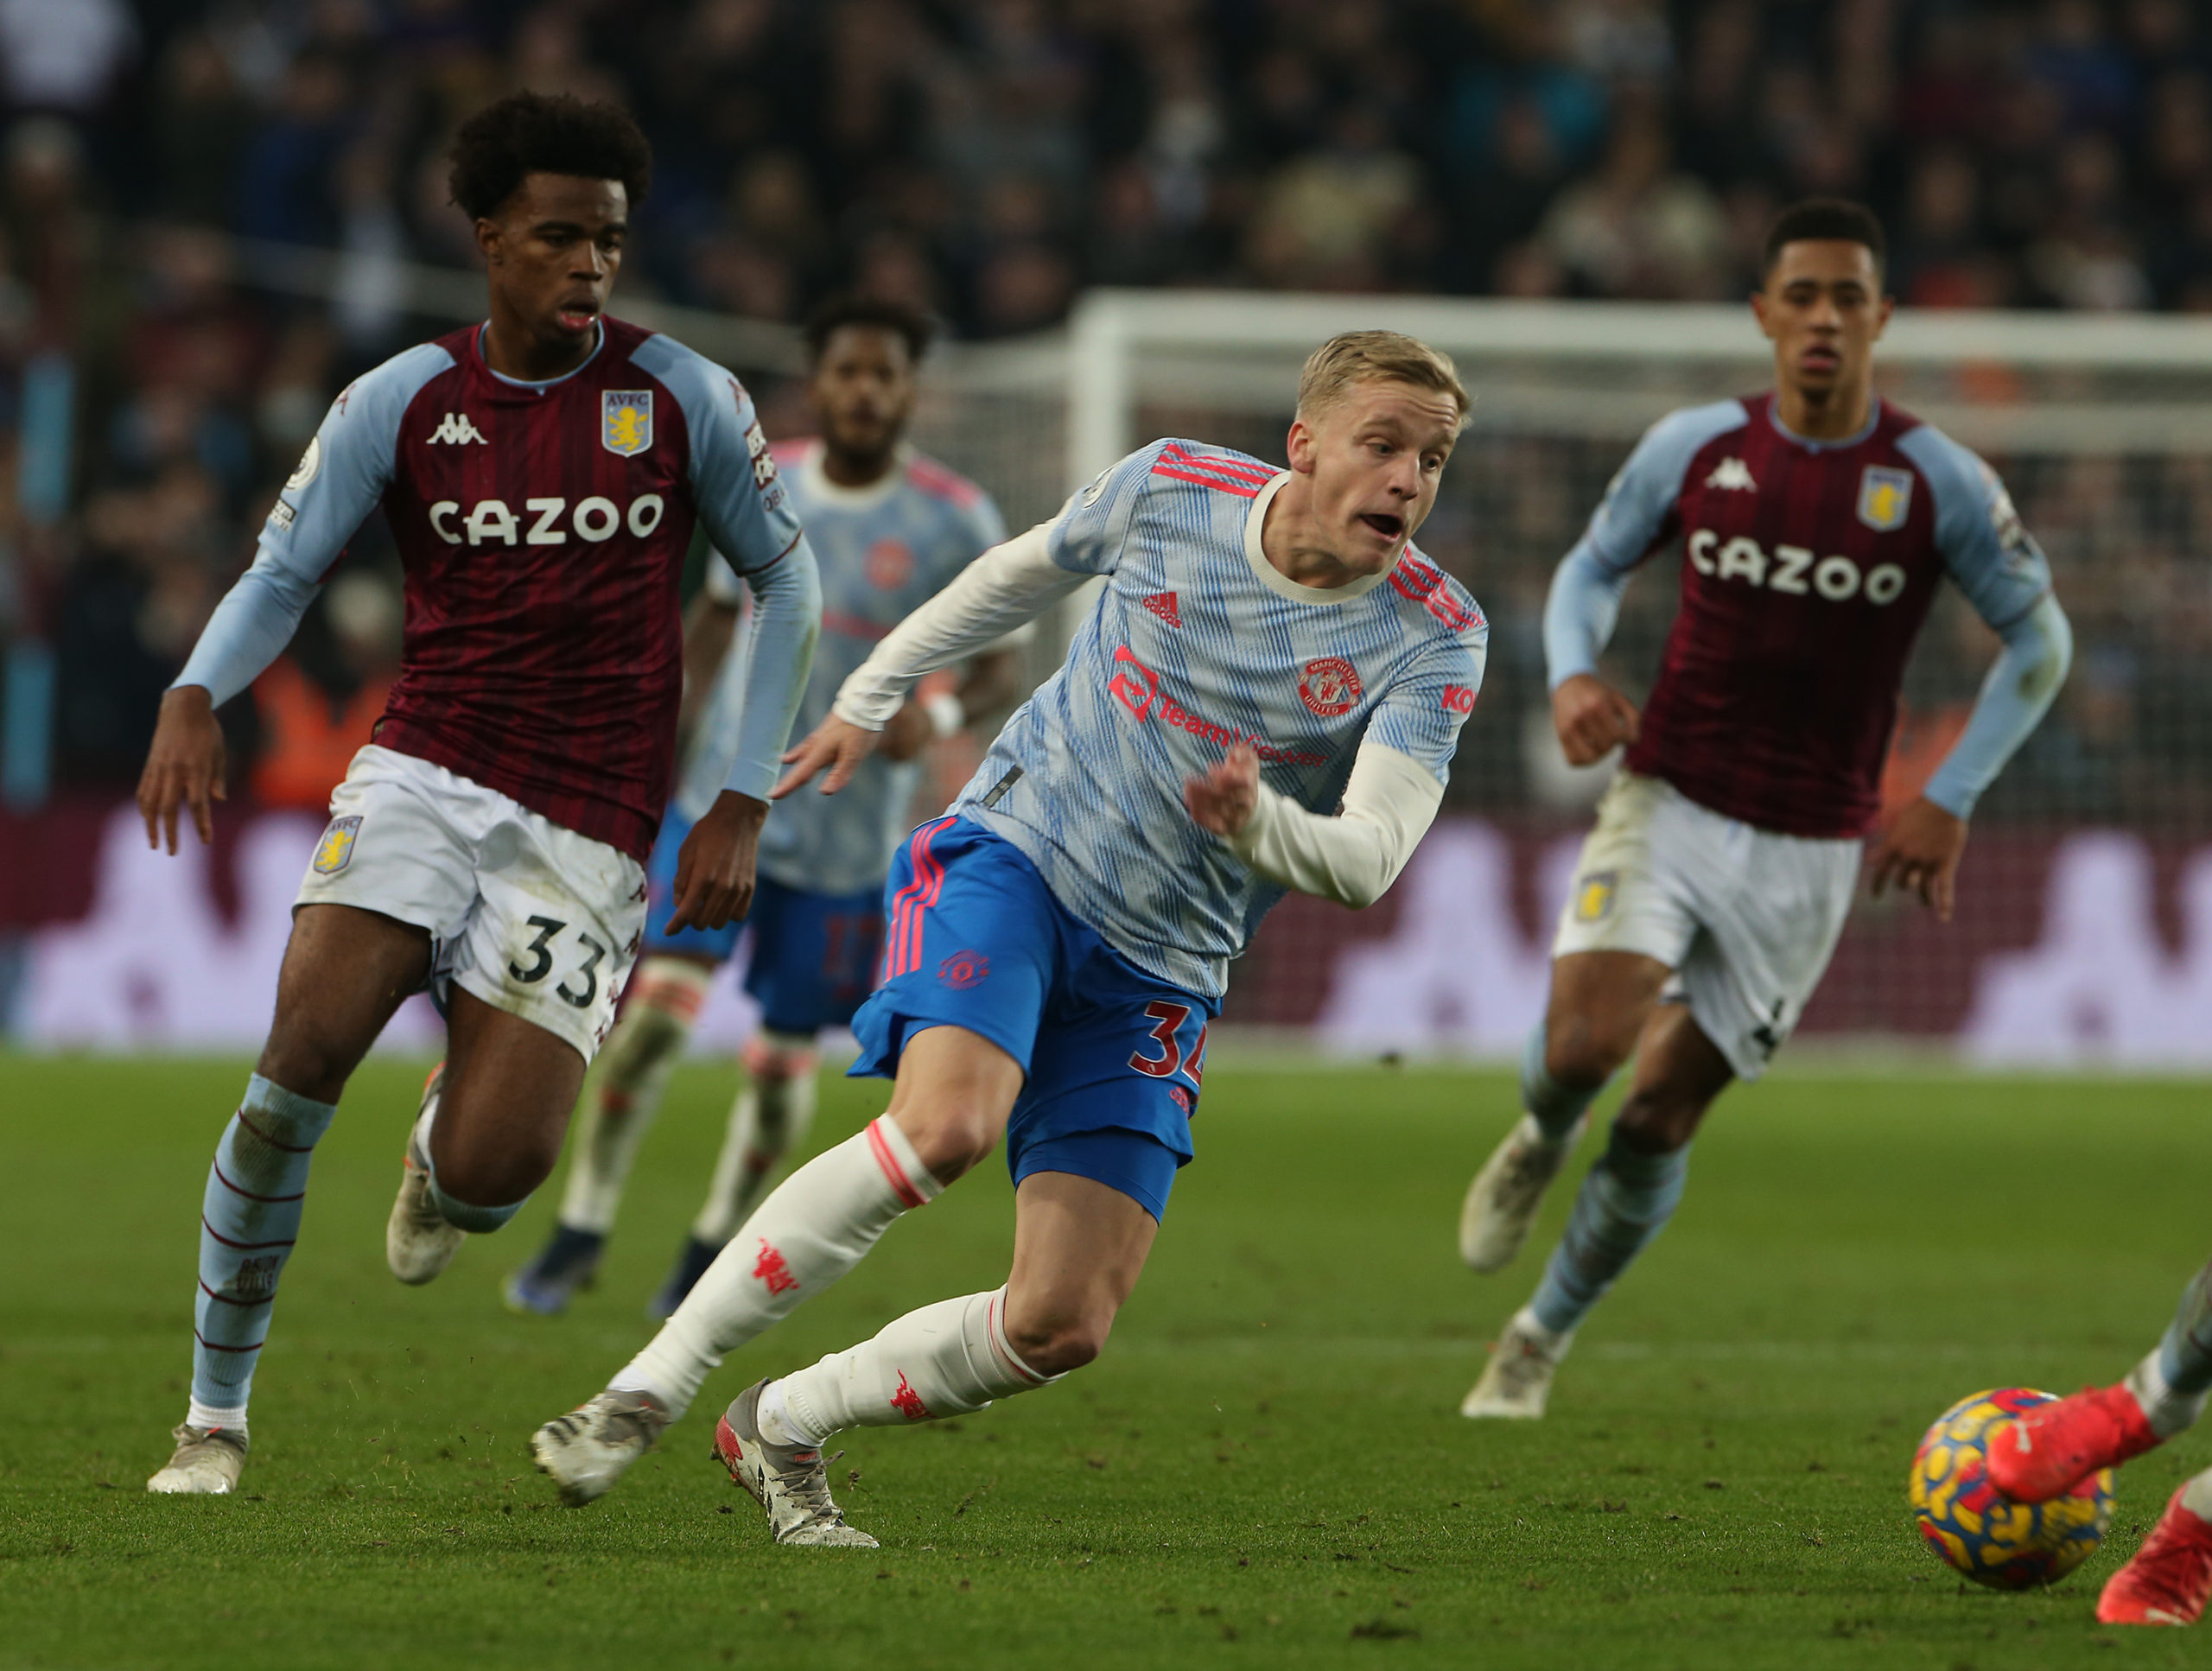 The real numbers behind Donny van de Beek's 50 appearances for Manchester United